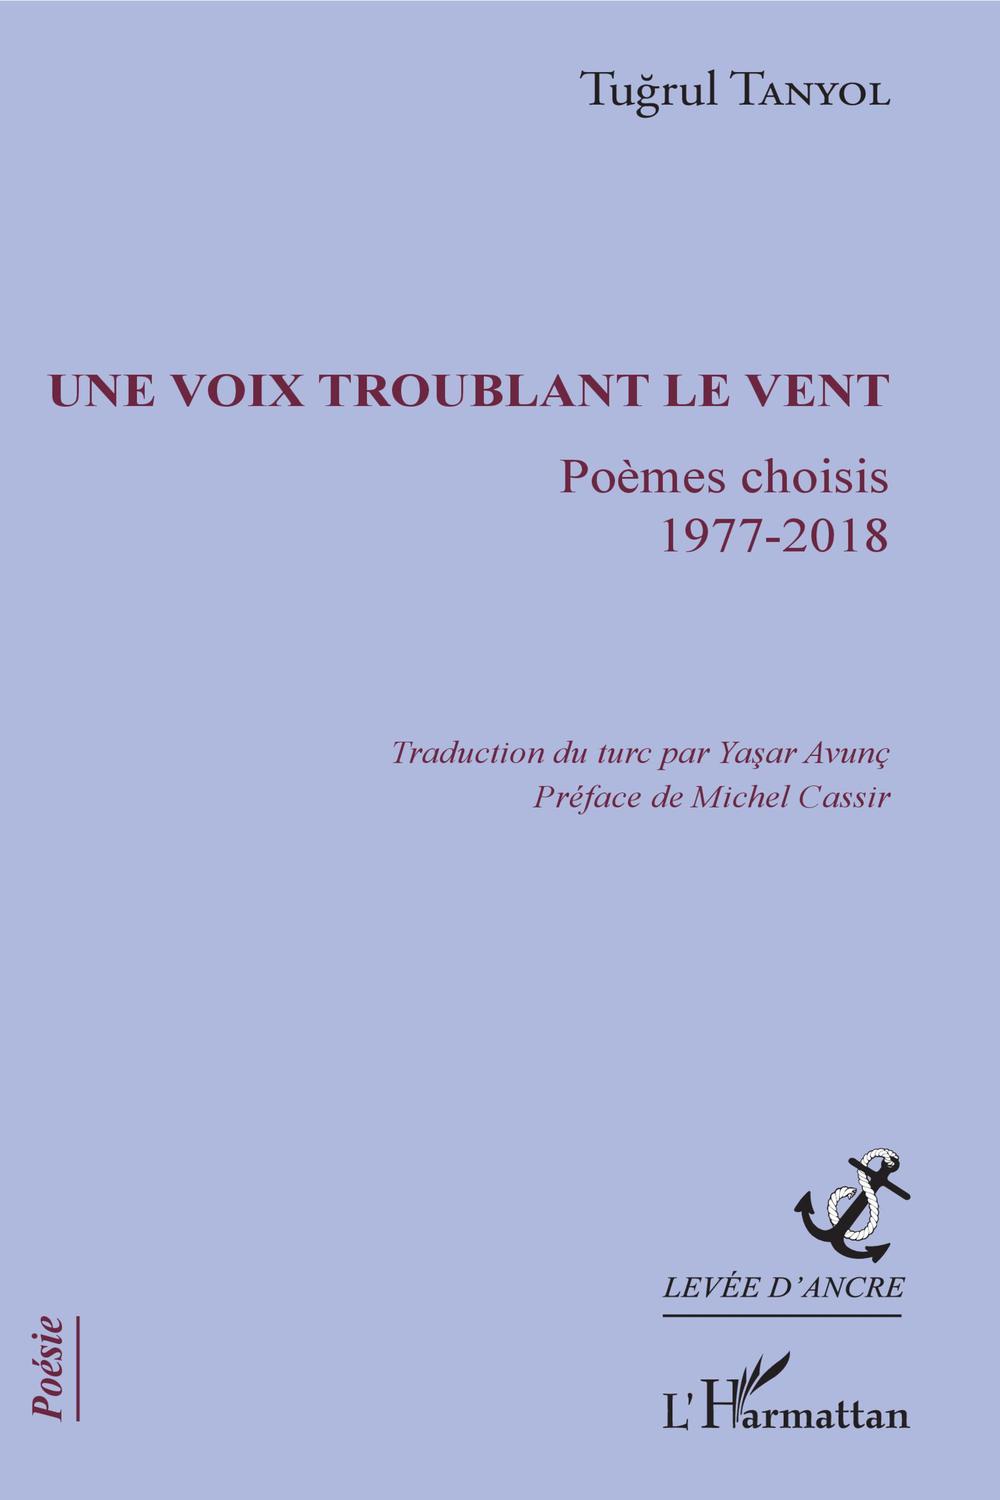 Une voix troublant le vent - TUGRUL TANYOL